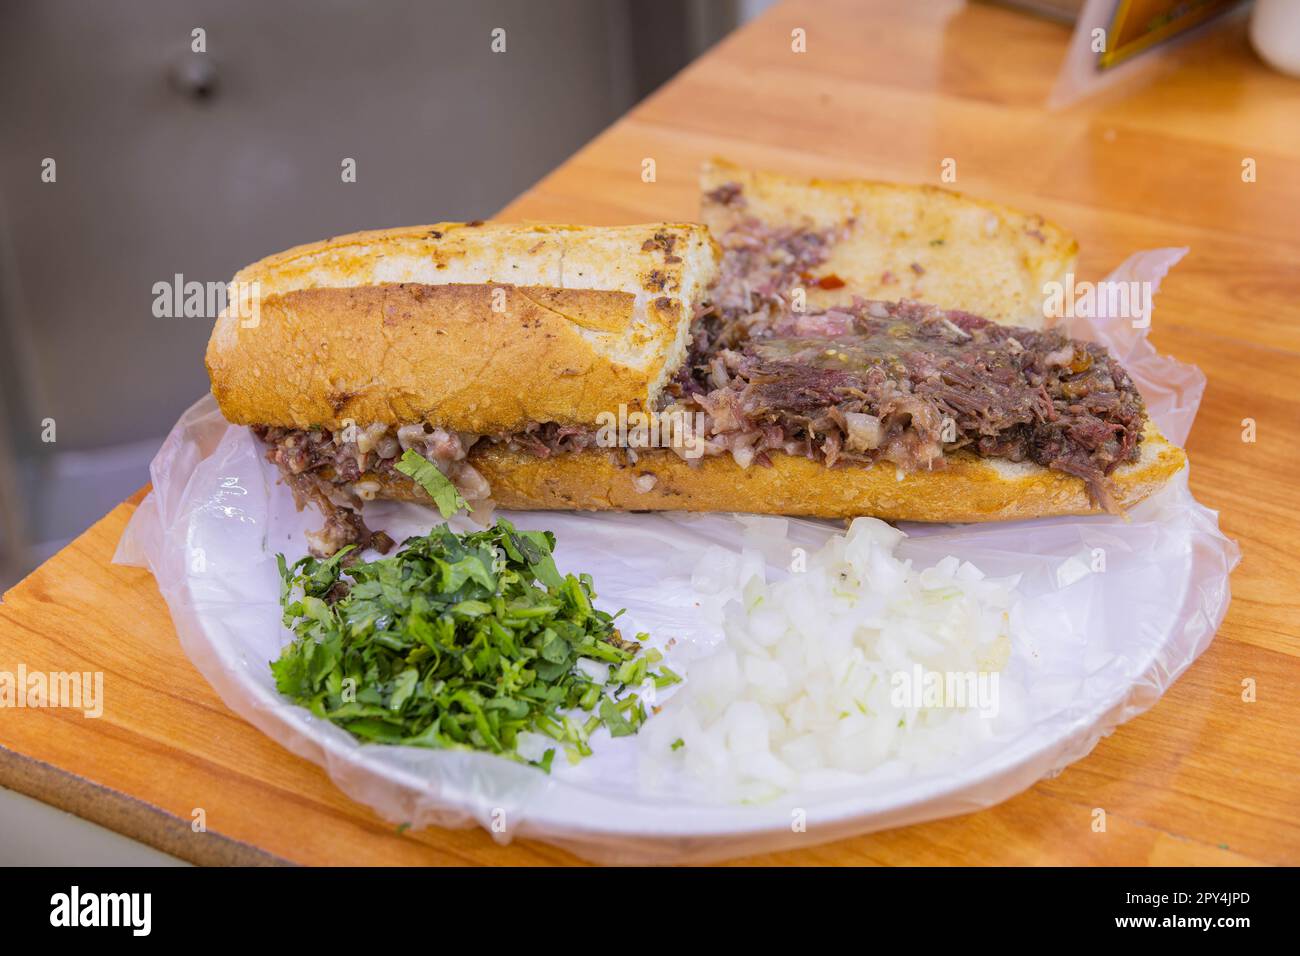 Close up shot of Mexician style sandwich at Mexico Stock Photo